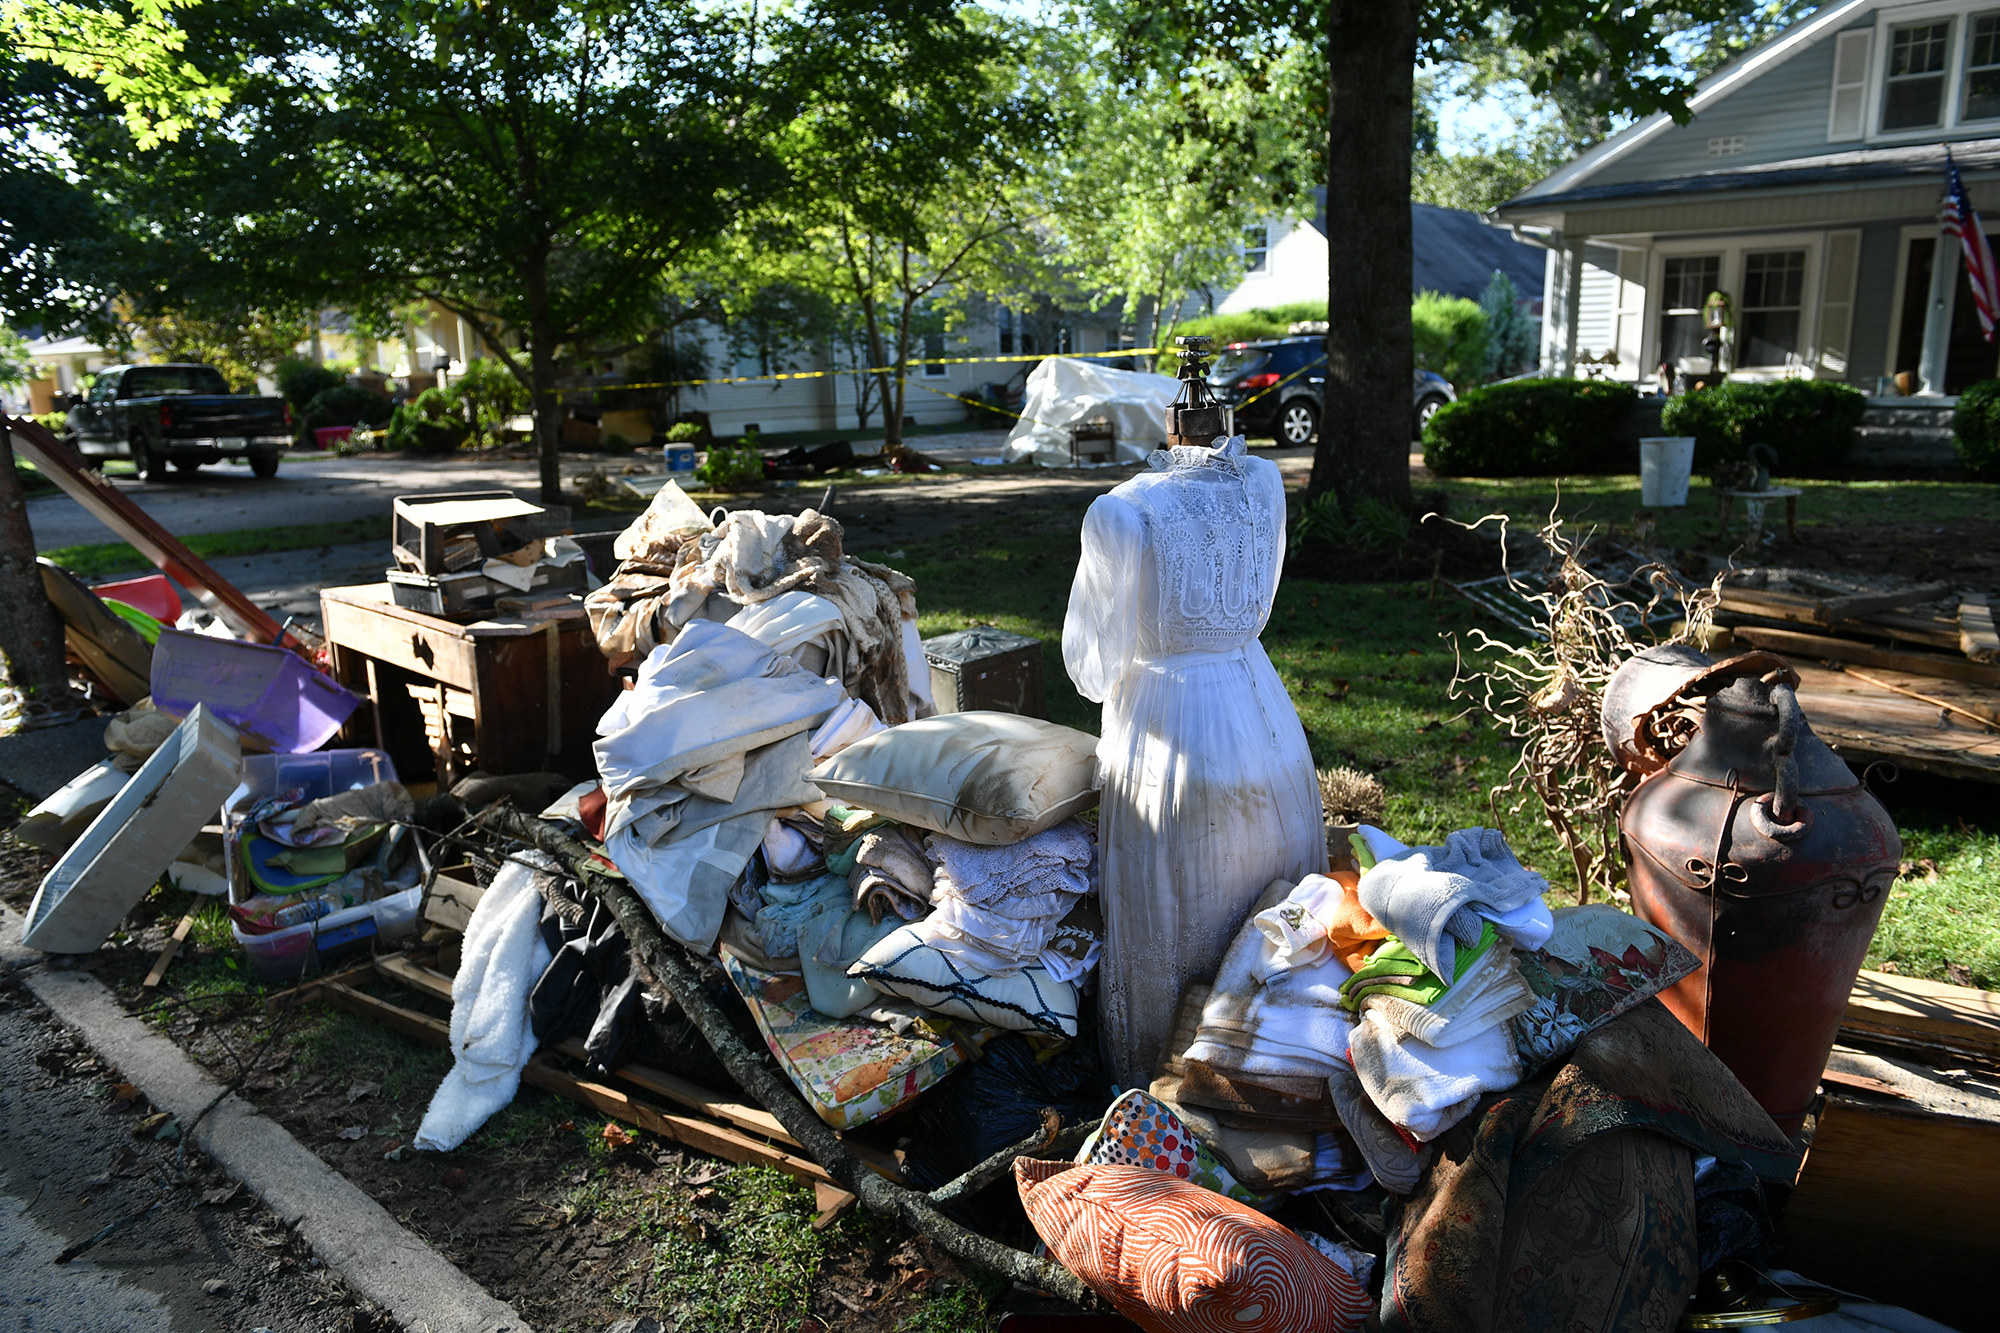 People&#x27;s belongings, including furniture, clothes, and pillows, sit near a sidewalk